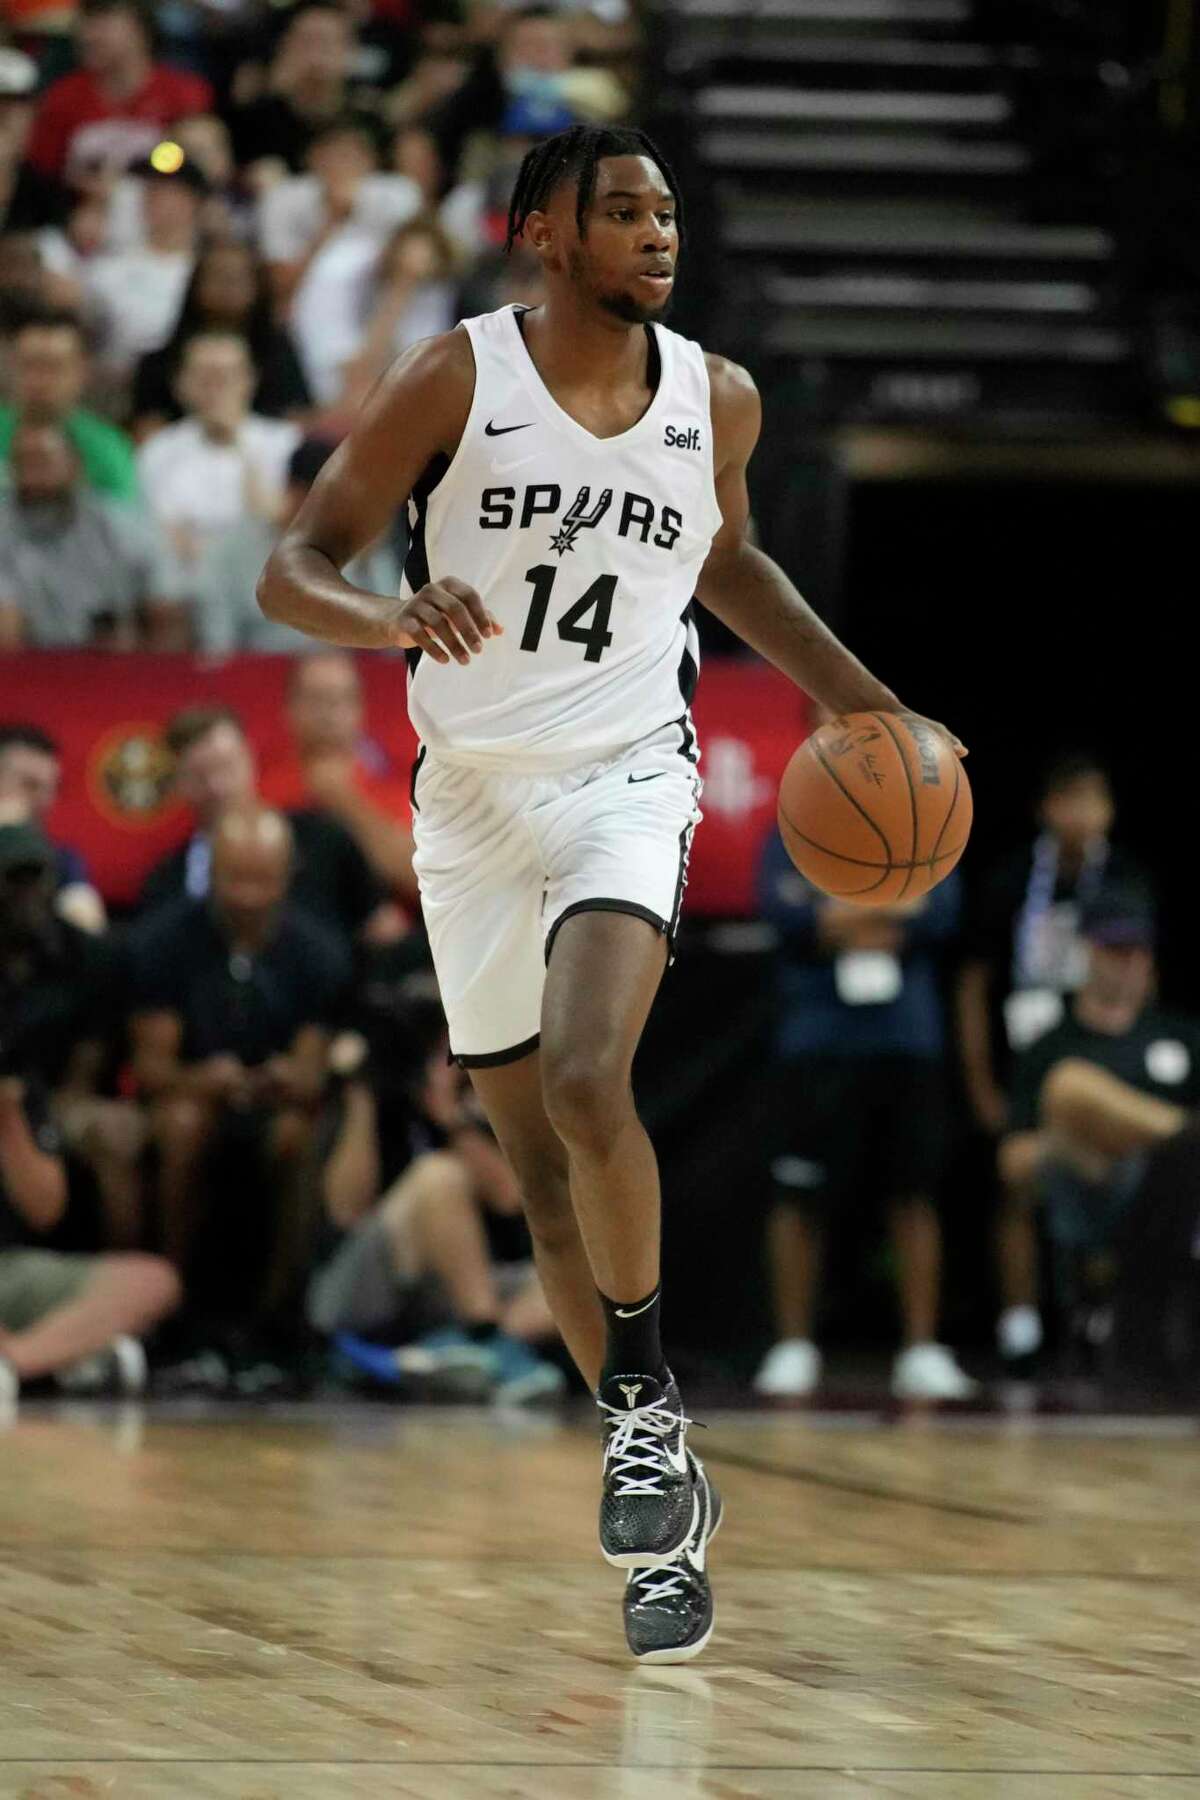 Despite strong showing from Wesley, Spurs fall to Hawks